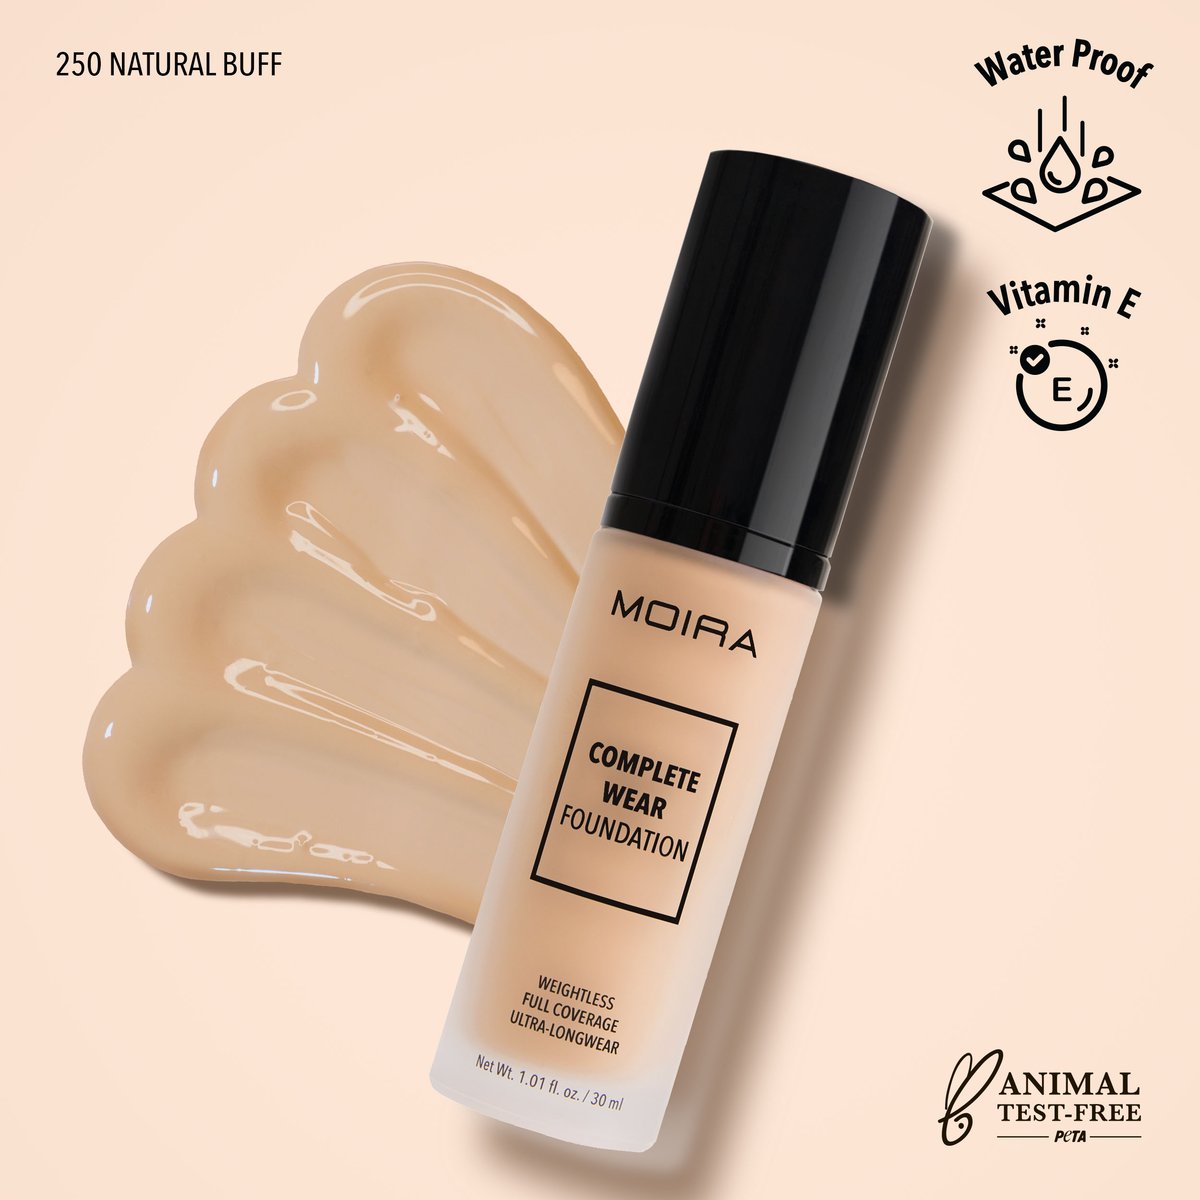 Moira Beauty - Complete Wear Foundation Natural Buff